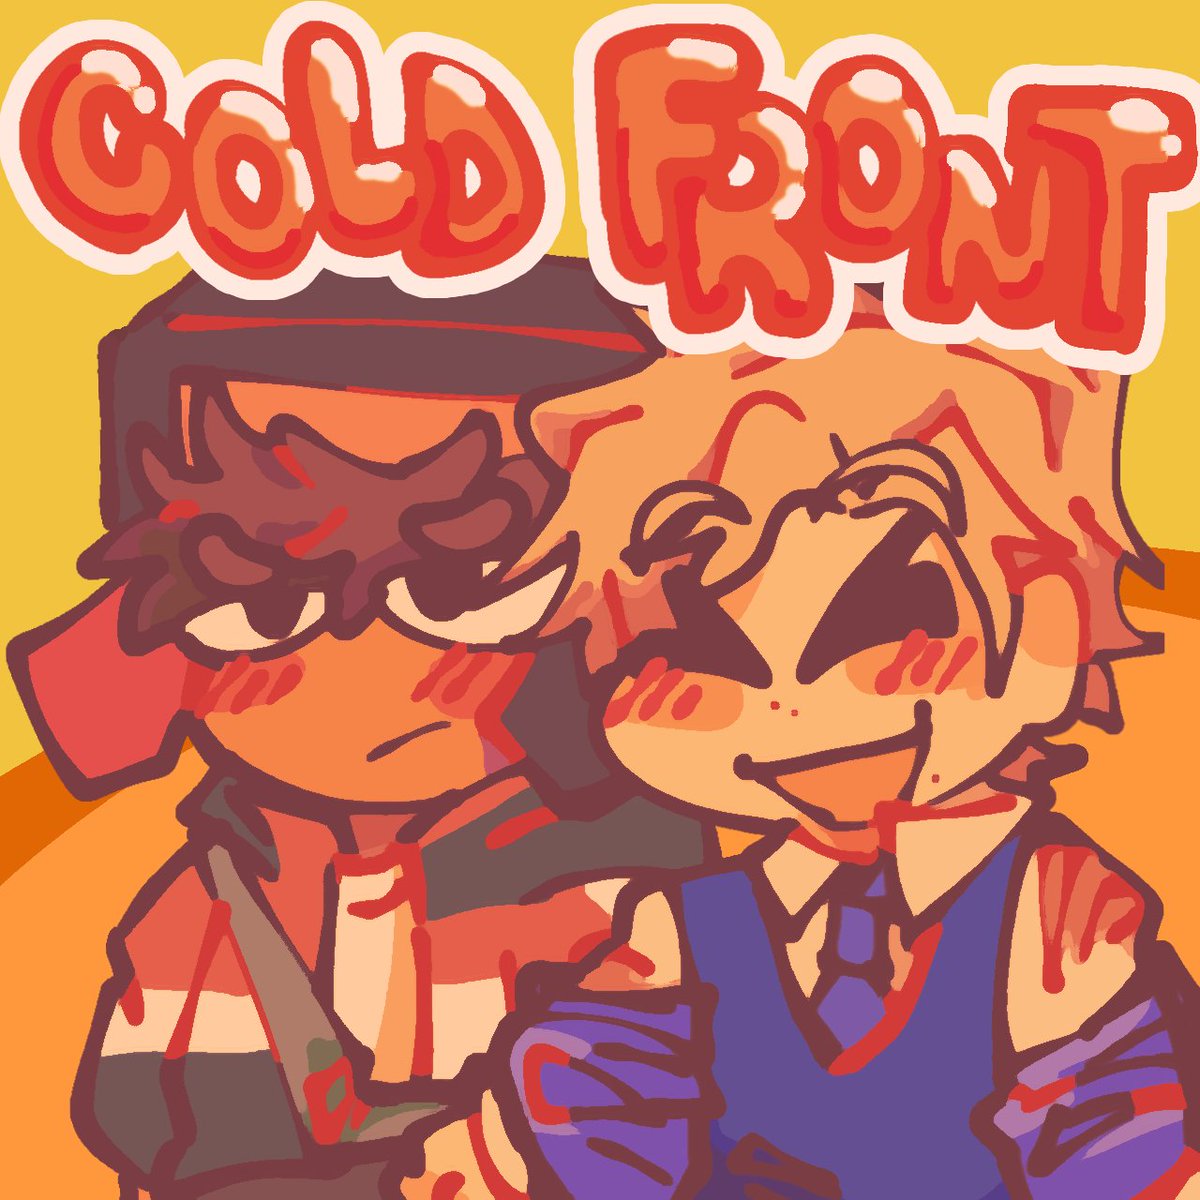 I actually adore this game and these two...gulp #ColdFront #coldfrontgame #Coldfrontfanart